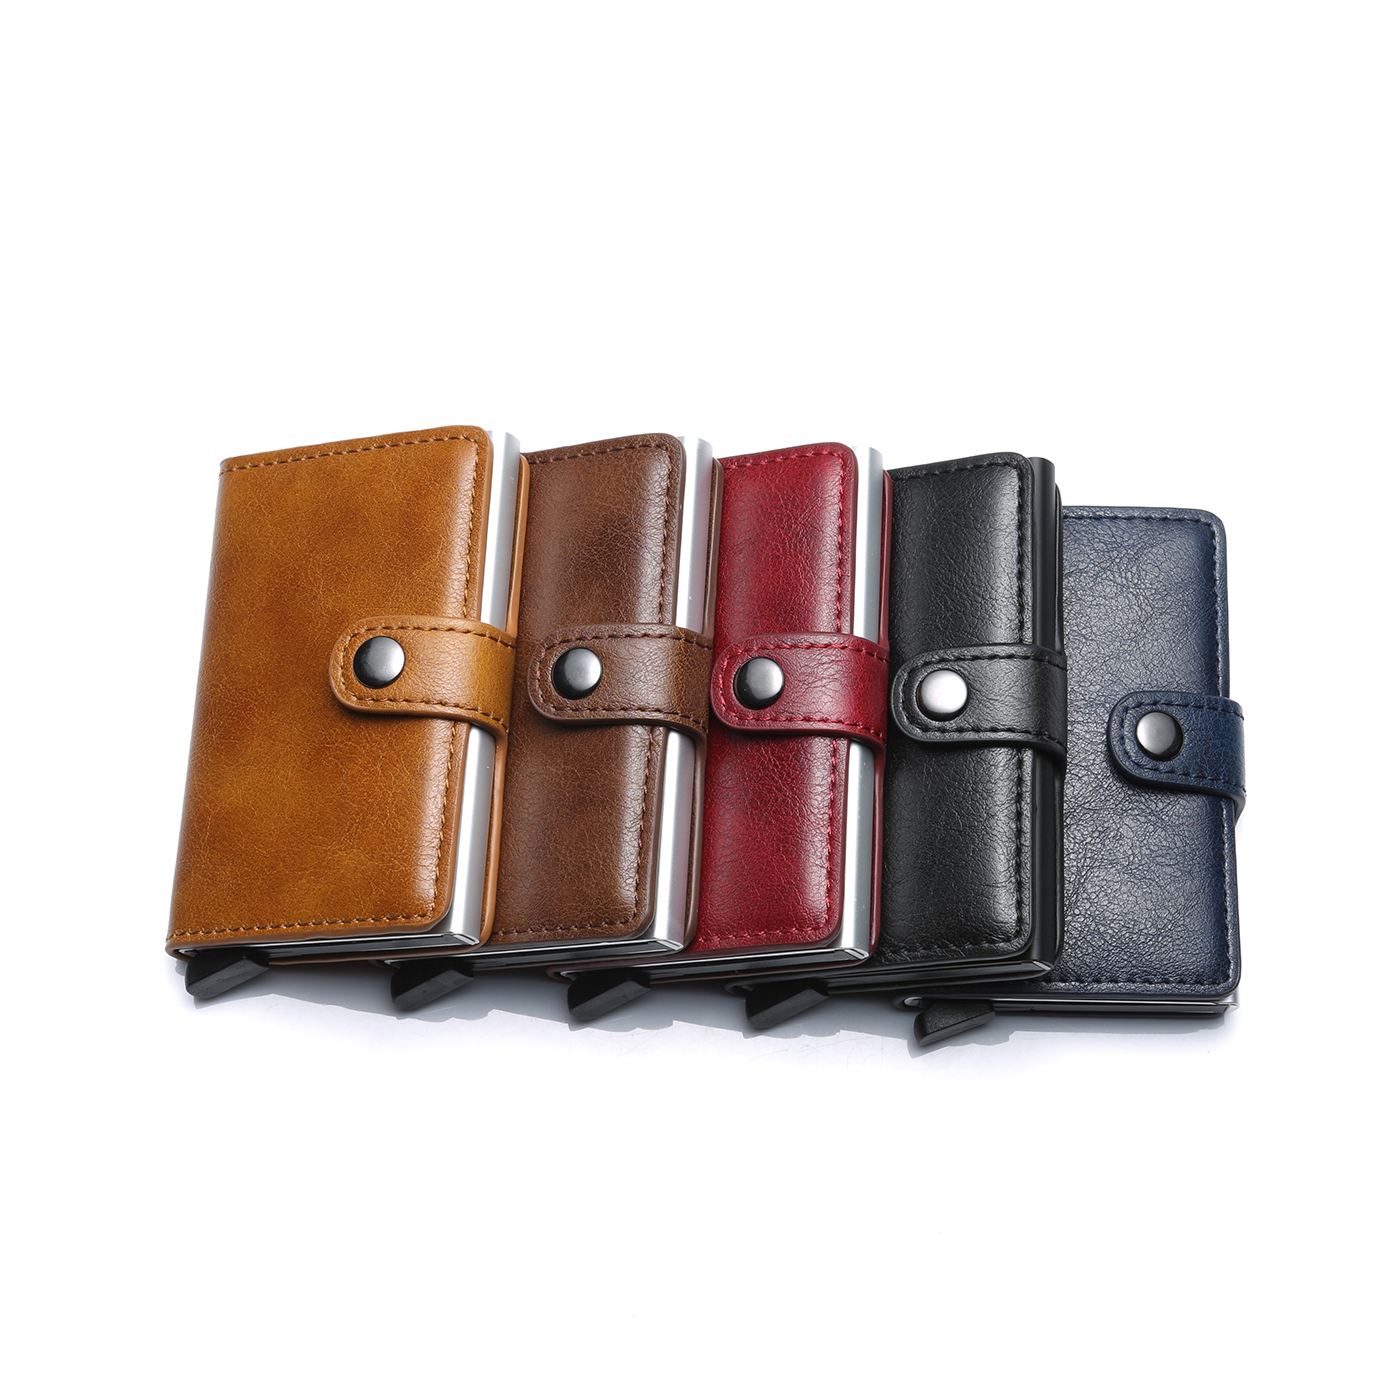 2020 Newest Design Pu Leather Cover Automatic Pop-up Side Push Button Stainless Steel Aluminum Credit Card Holder Wallet